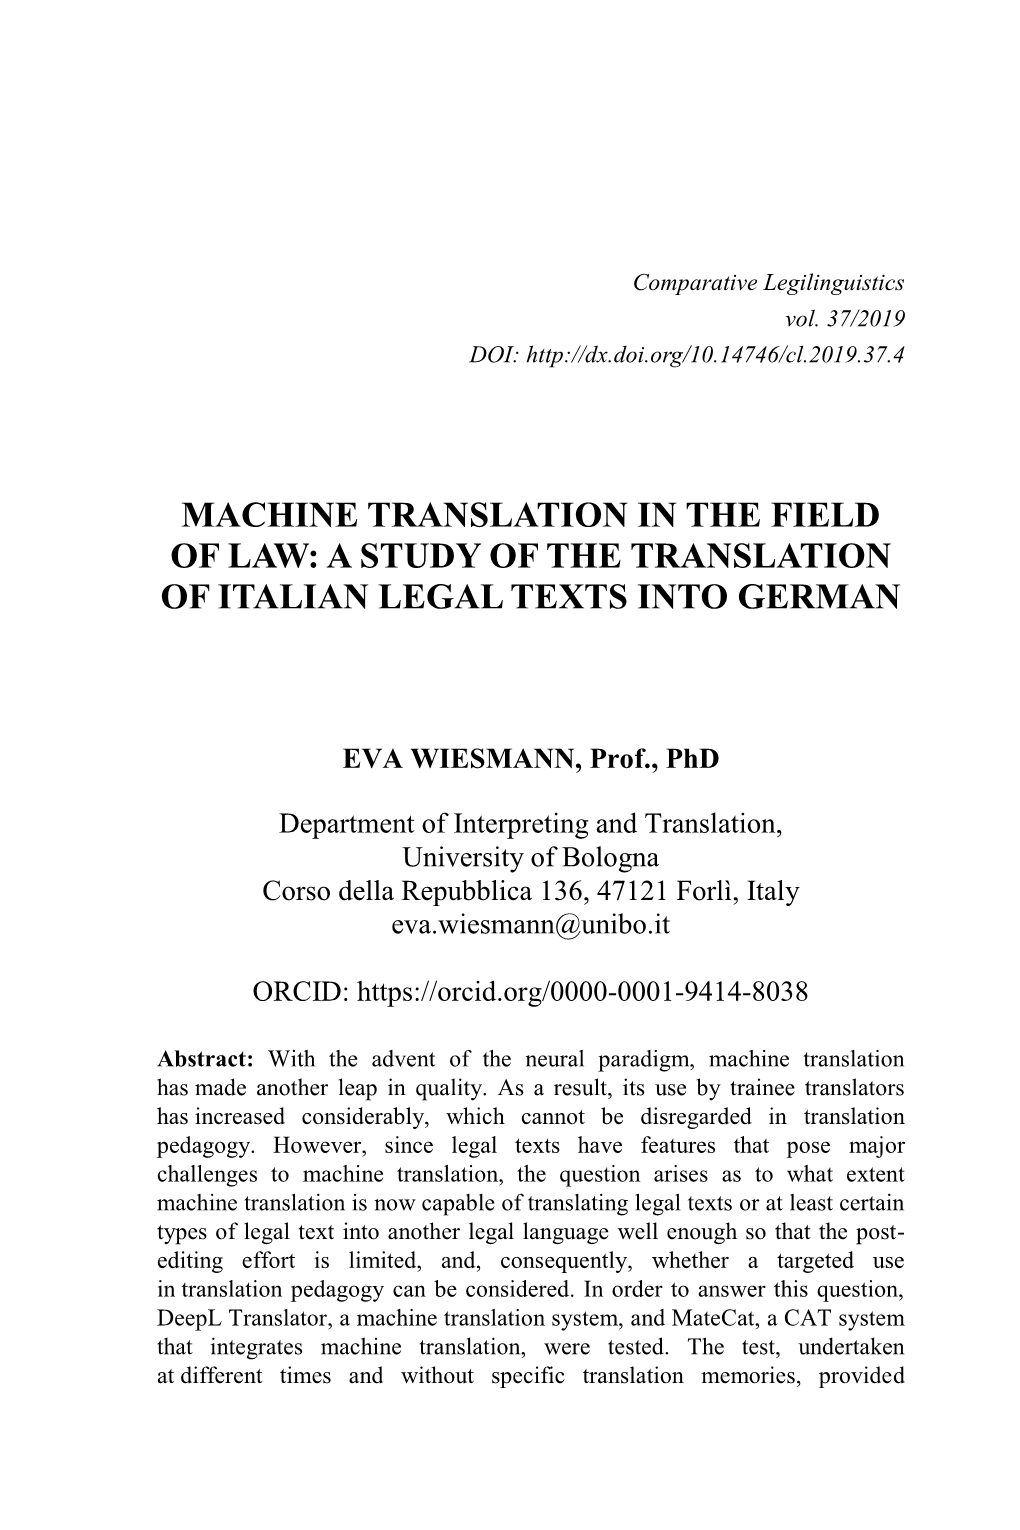 Machine Translation in the Field of Law: a Study of the Translation of Italian Legal Texts Into German